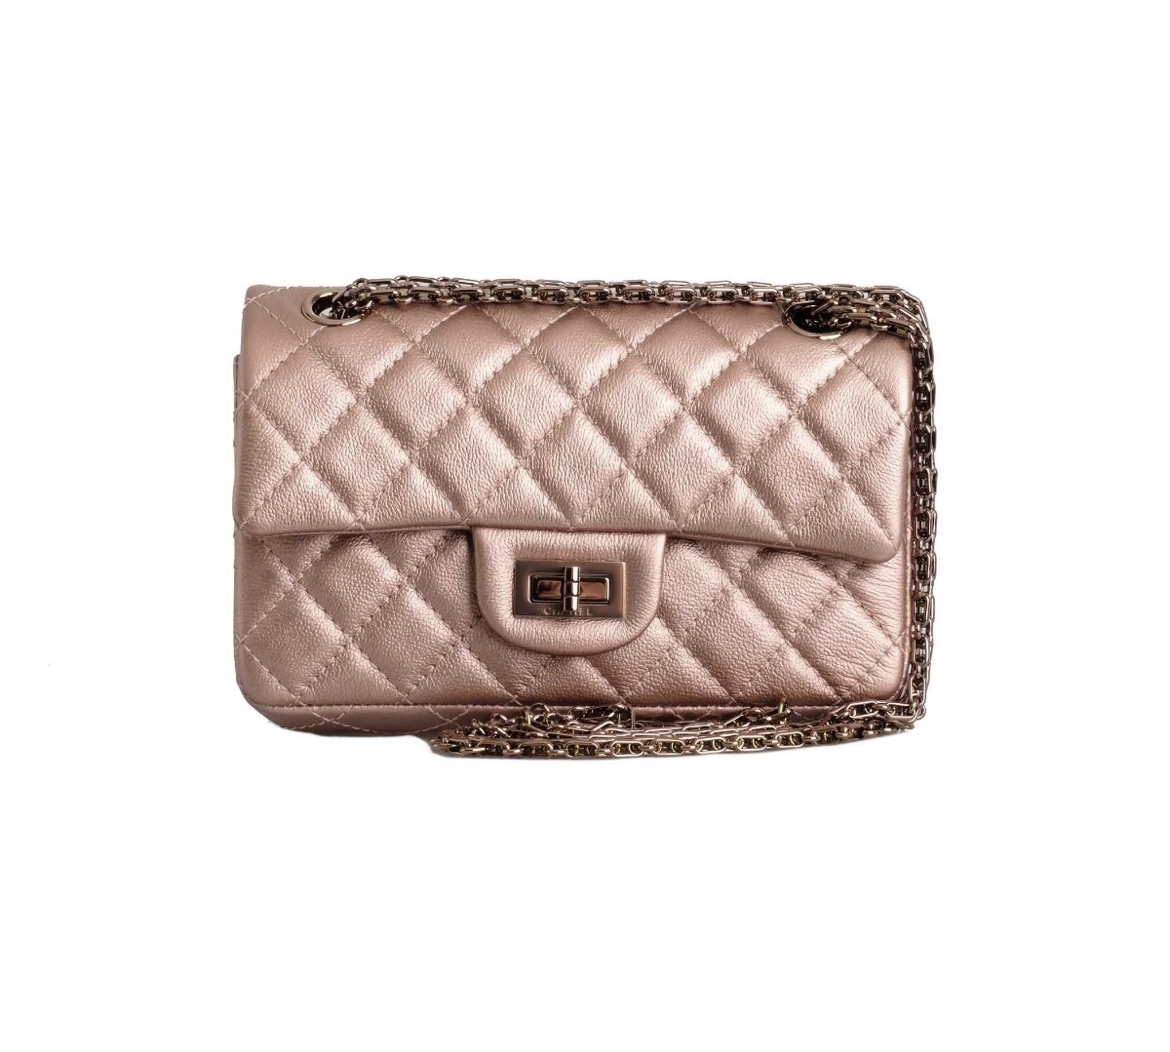 Chanel Metallic Rose Gold Reissue 2.55 bag at the best price